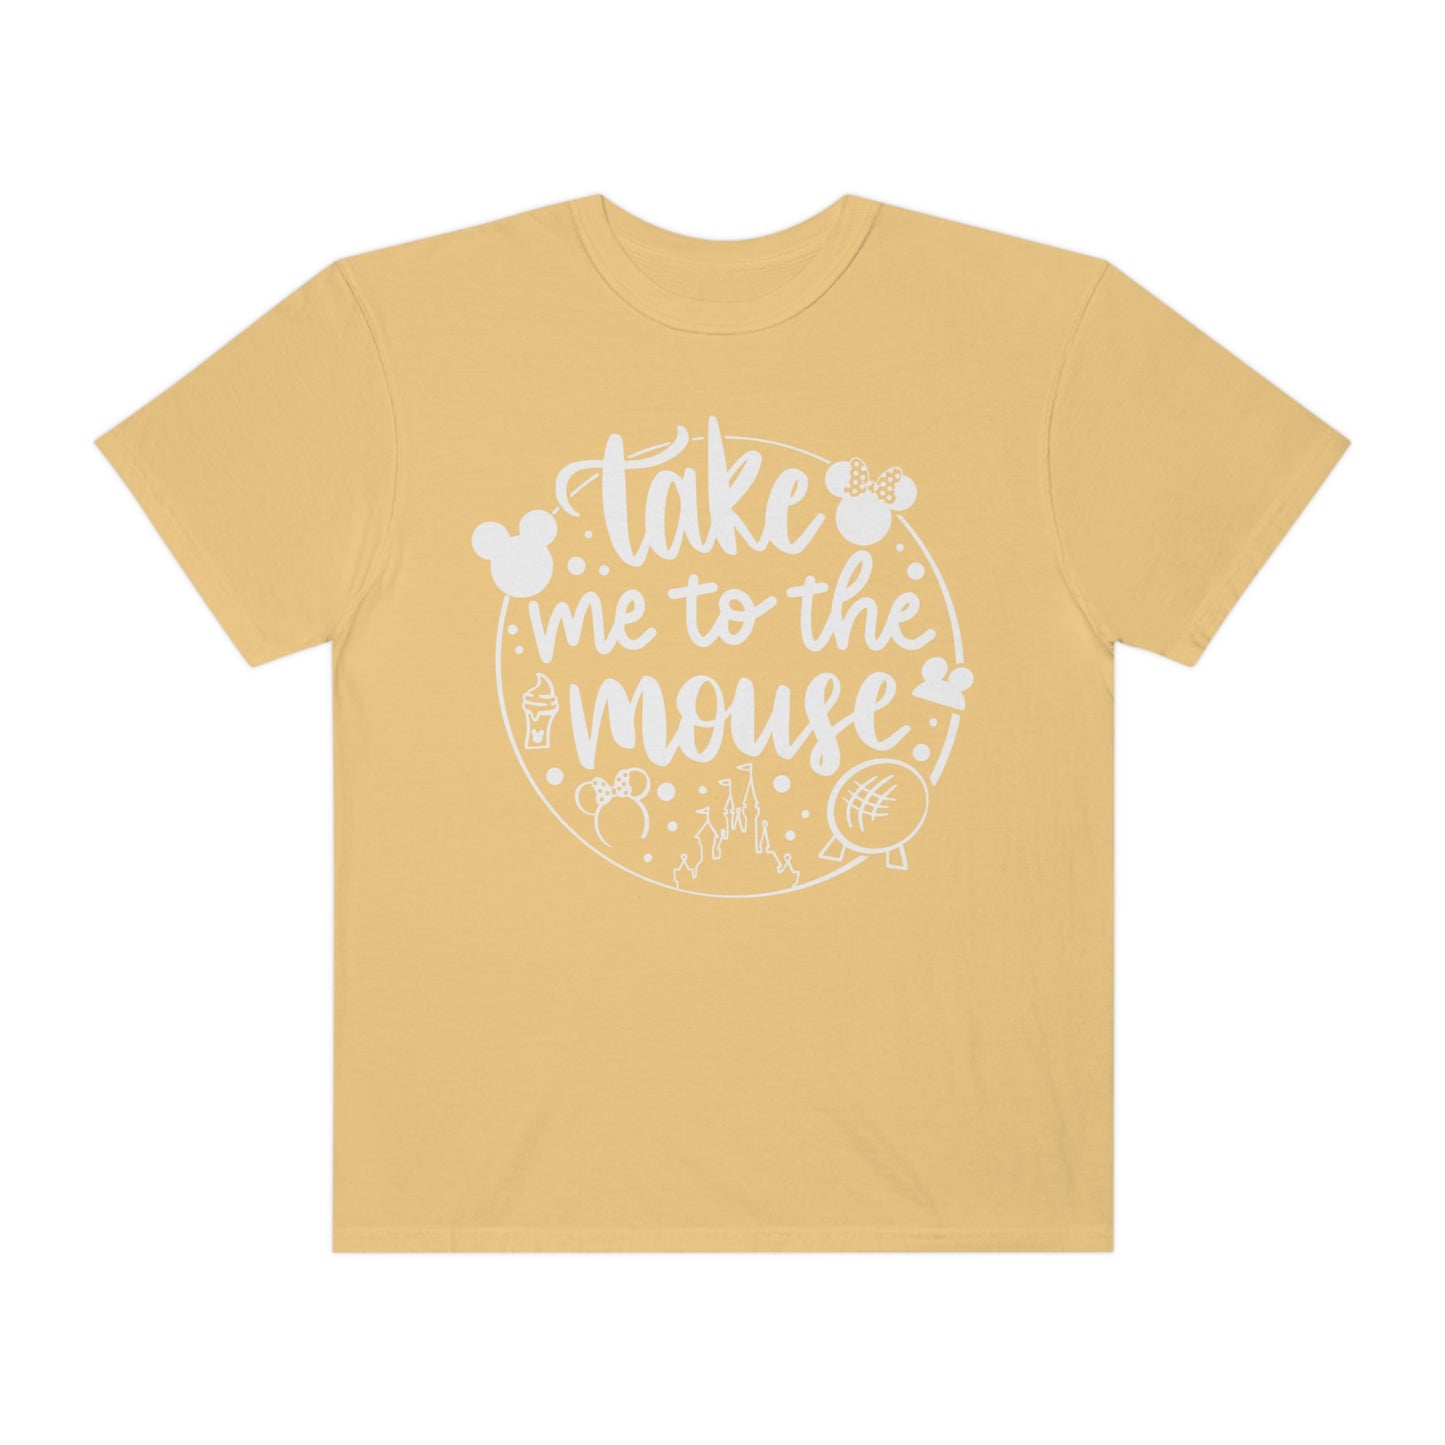 Take Me To The Mouse Adult Unisex Tee